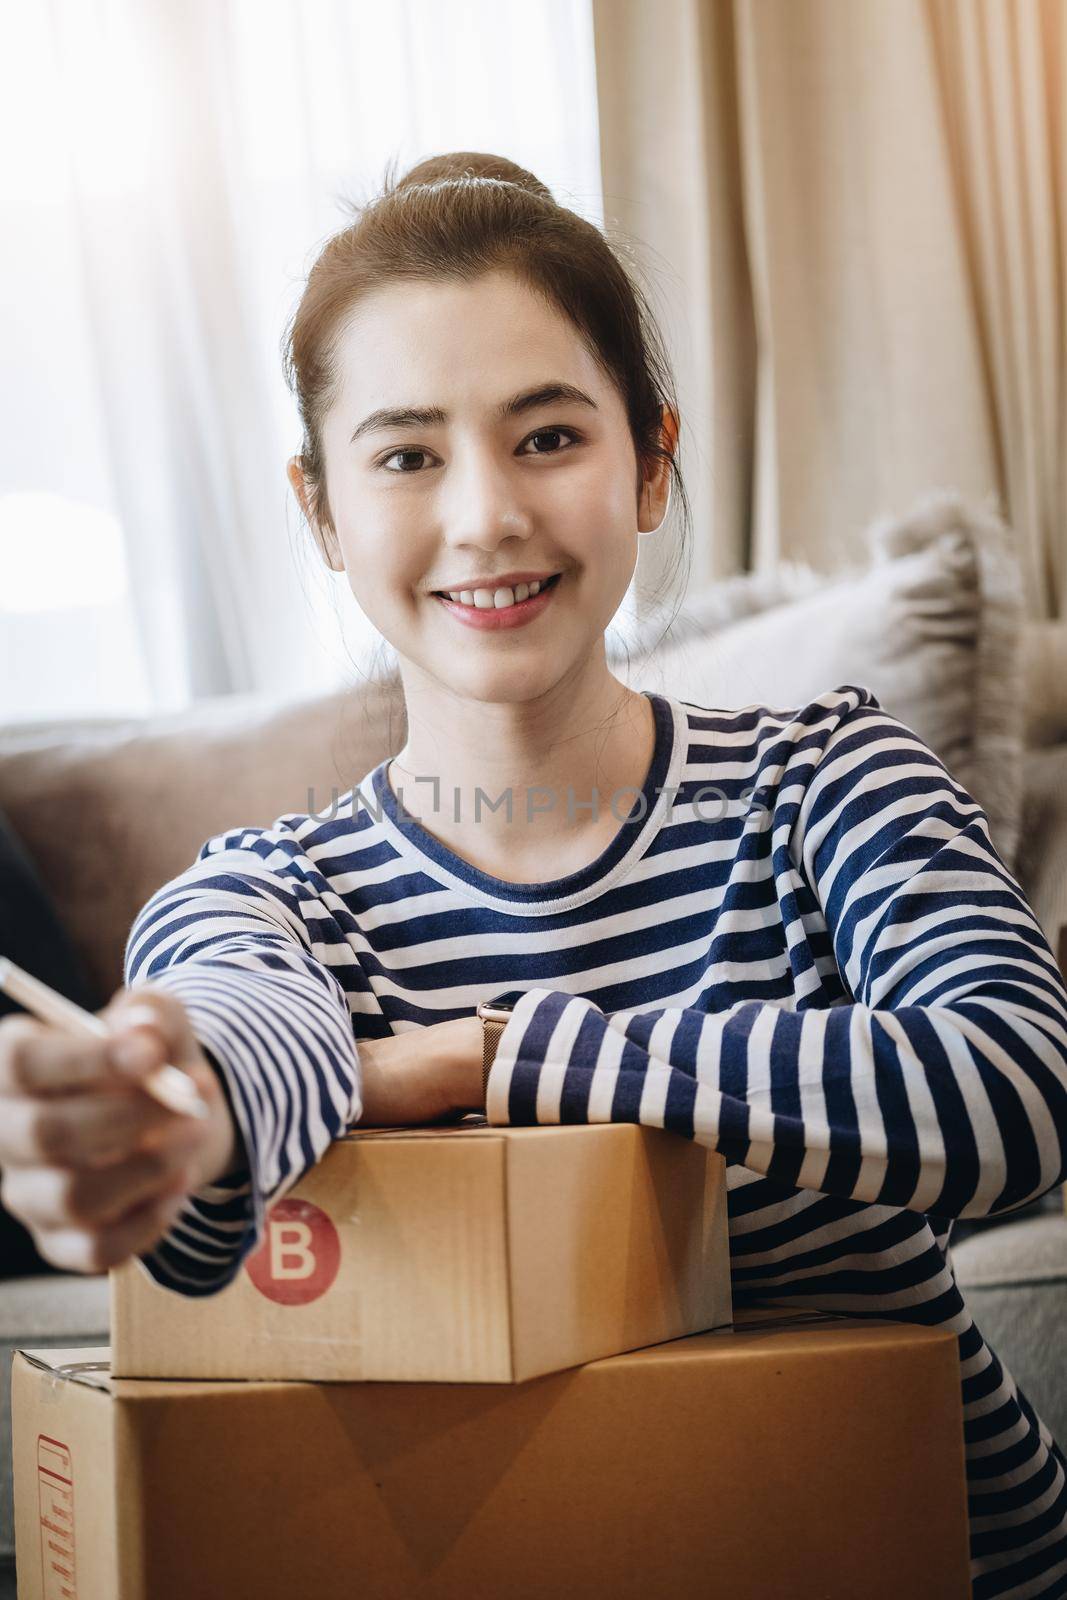 Online selling business idea, beautiful girl smiling happily from selling products online from home